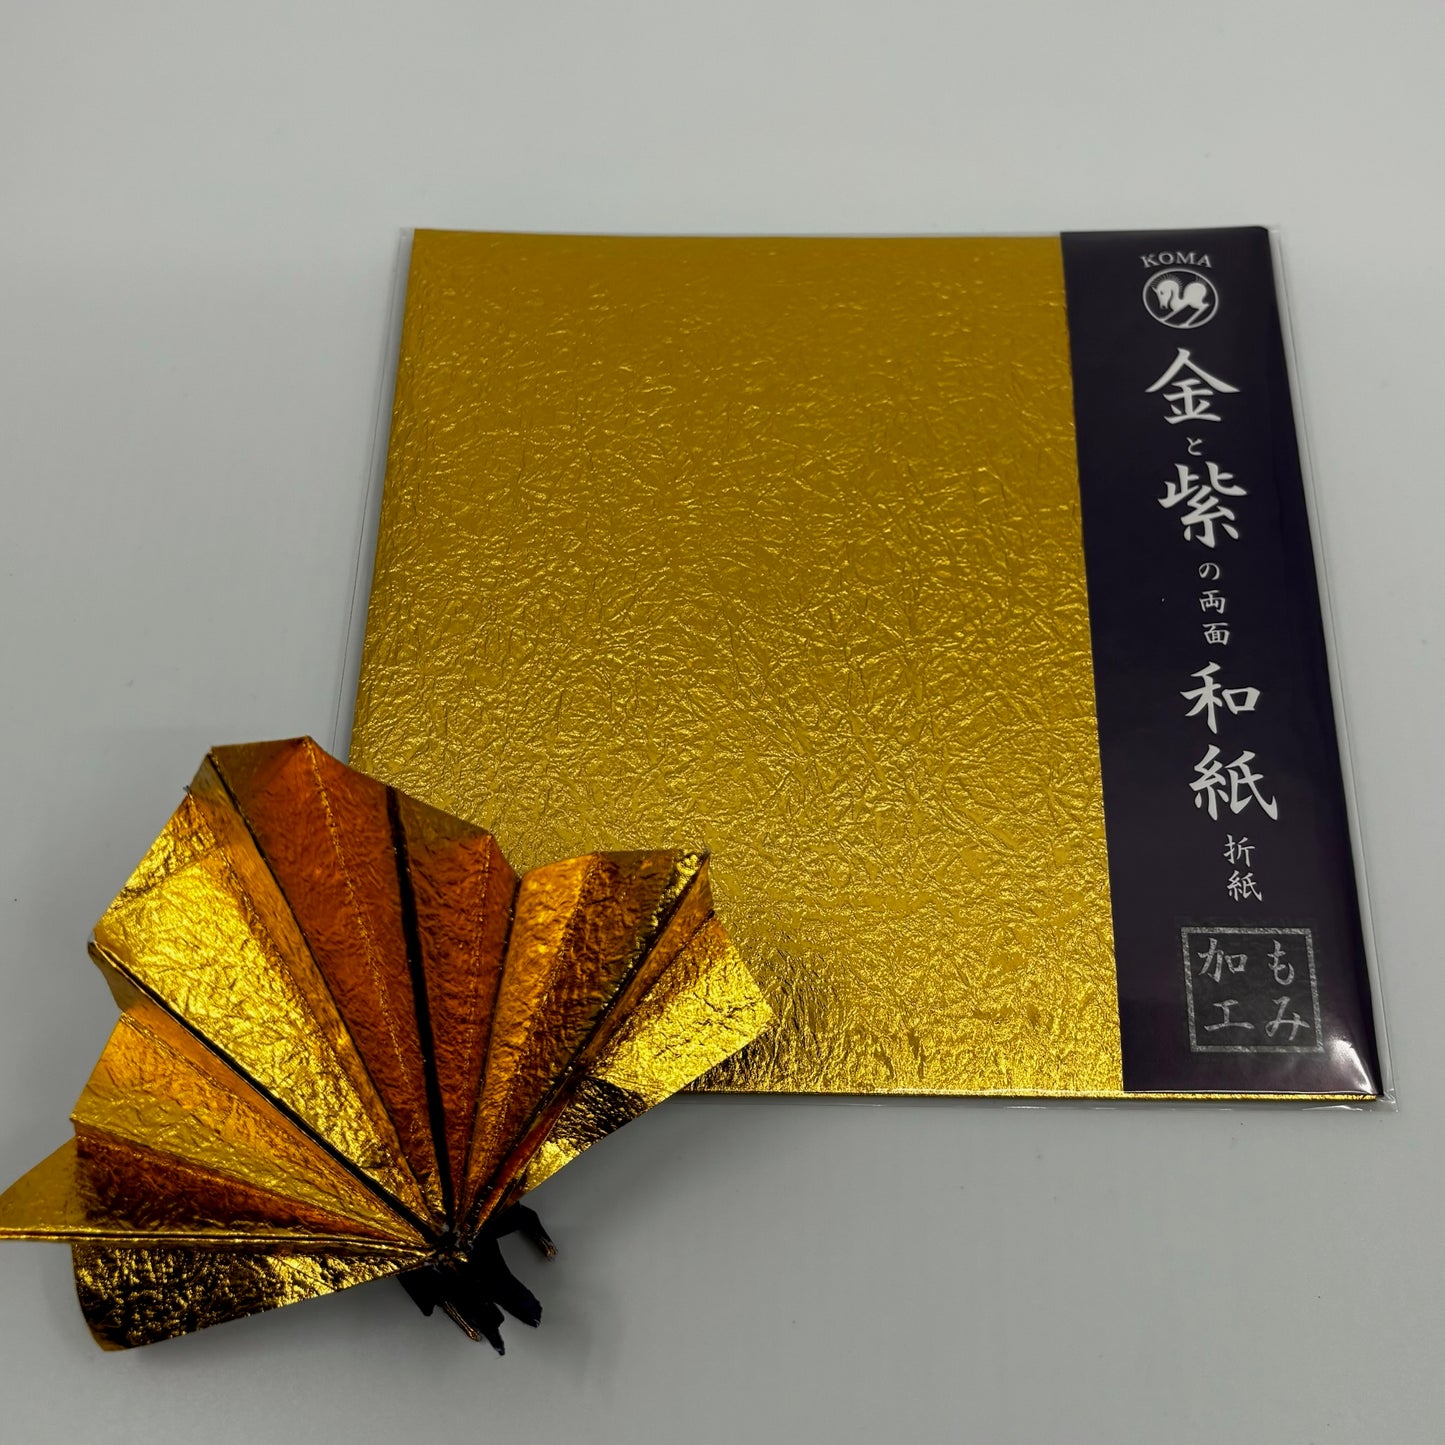 Duo Washi Crumpled single color Gold/Purple 7inch (18cm) 10sheets 金と紫の両面和紙折紙　もみ加工